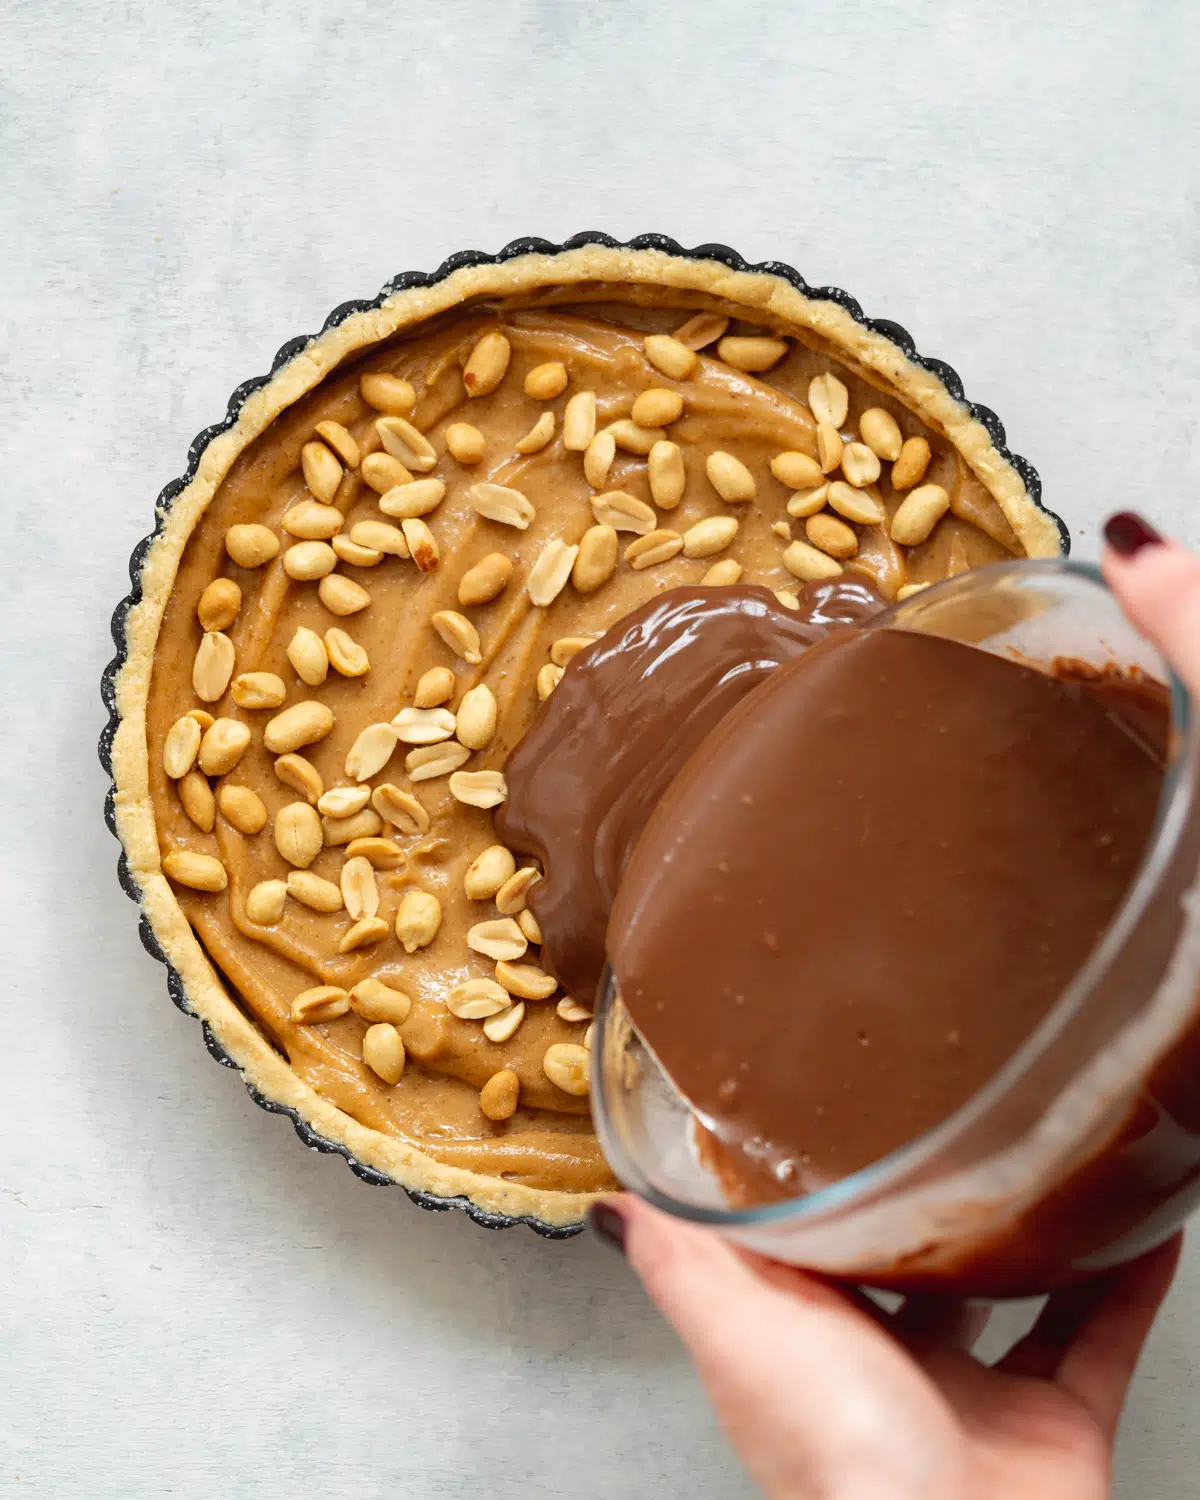 pouring melted chocolate ganache into a tart with peanut butter caramel in it.